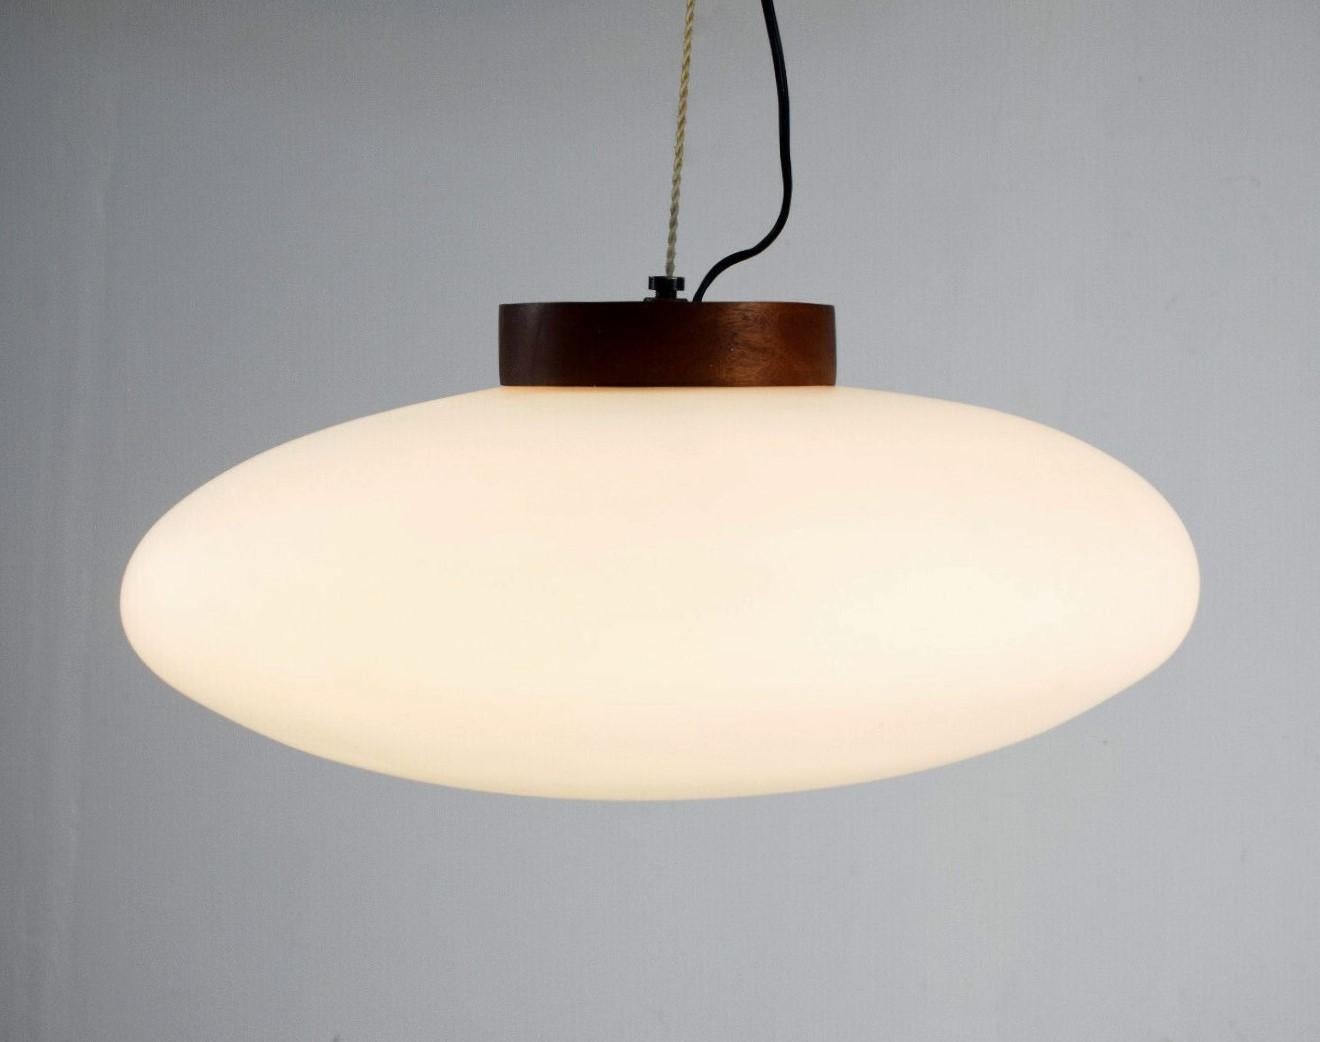 Large Stilnovo Pendant Brushed Satin Glass Diffuser and Wood, Italy, 1950s For Sale 1